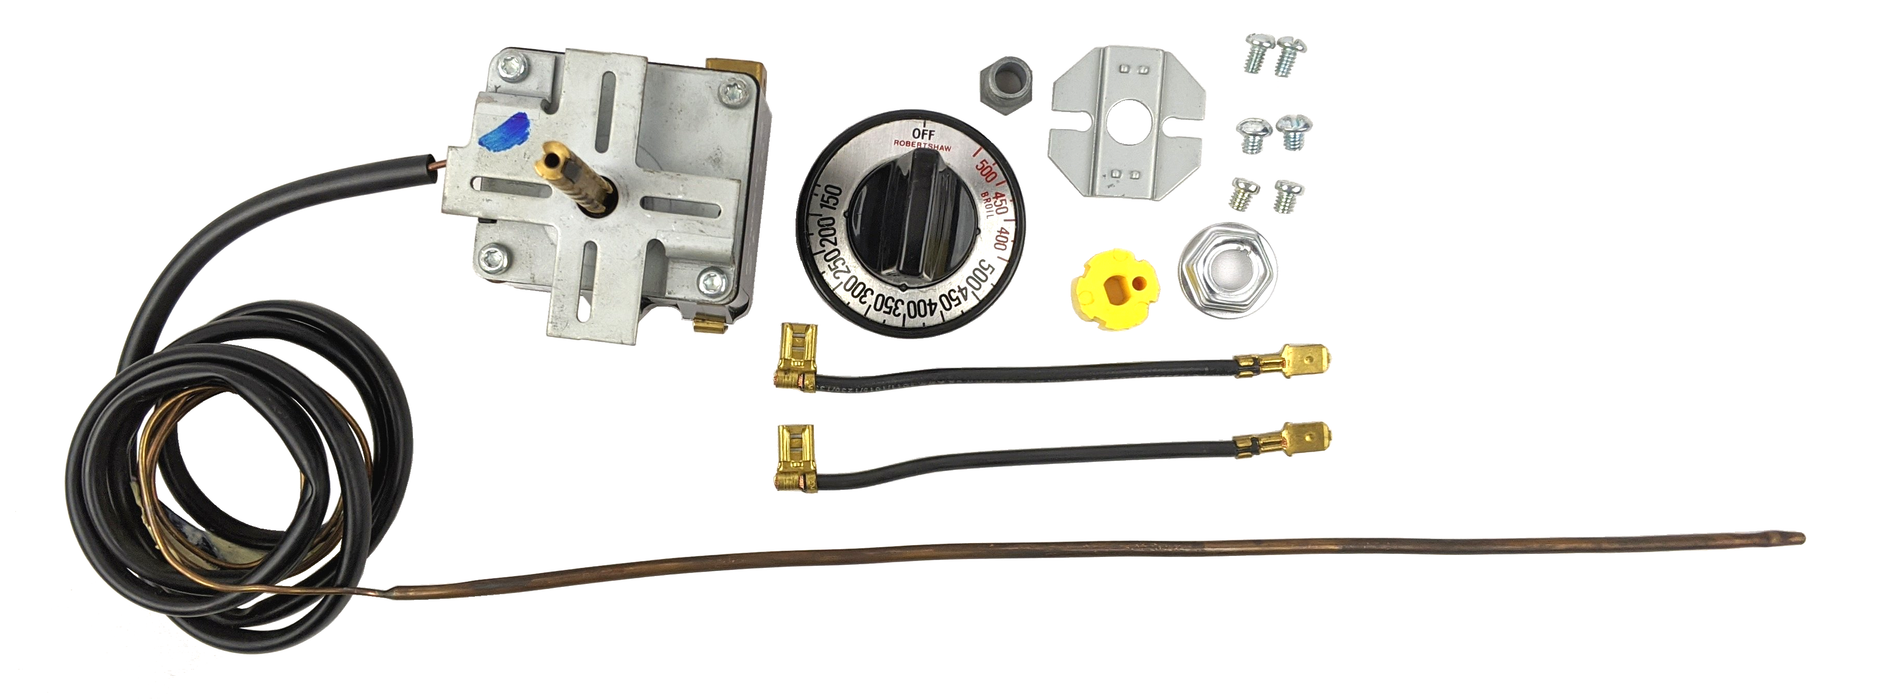 Robertshaw 6700G0001: Universal Electric Range Replacement Thermostat, 240VAC With Auto-Preheat, Variable Broil, and Pilot Light fits House of Webster Country Charm Ranges